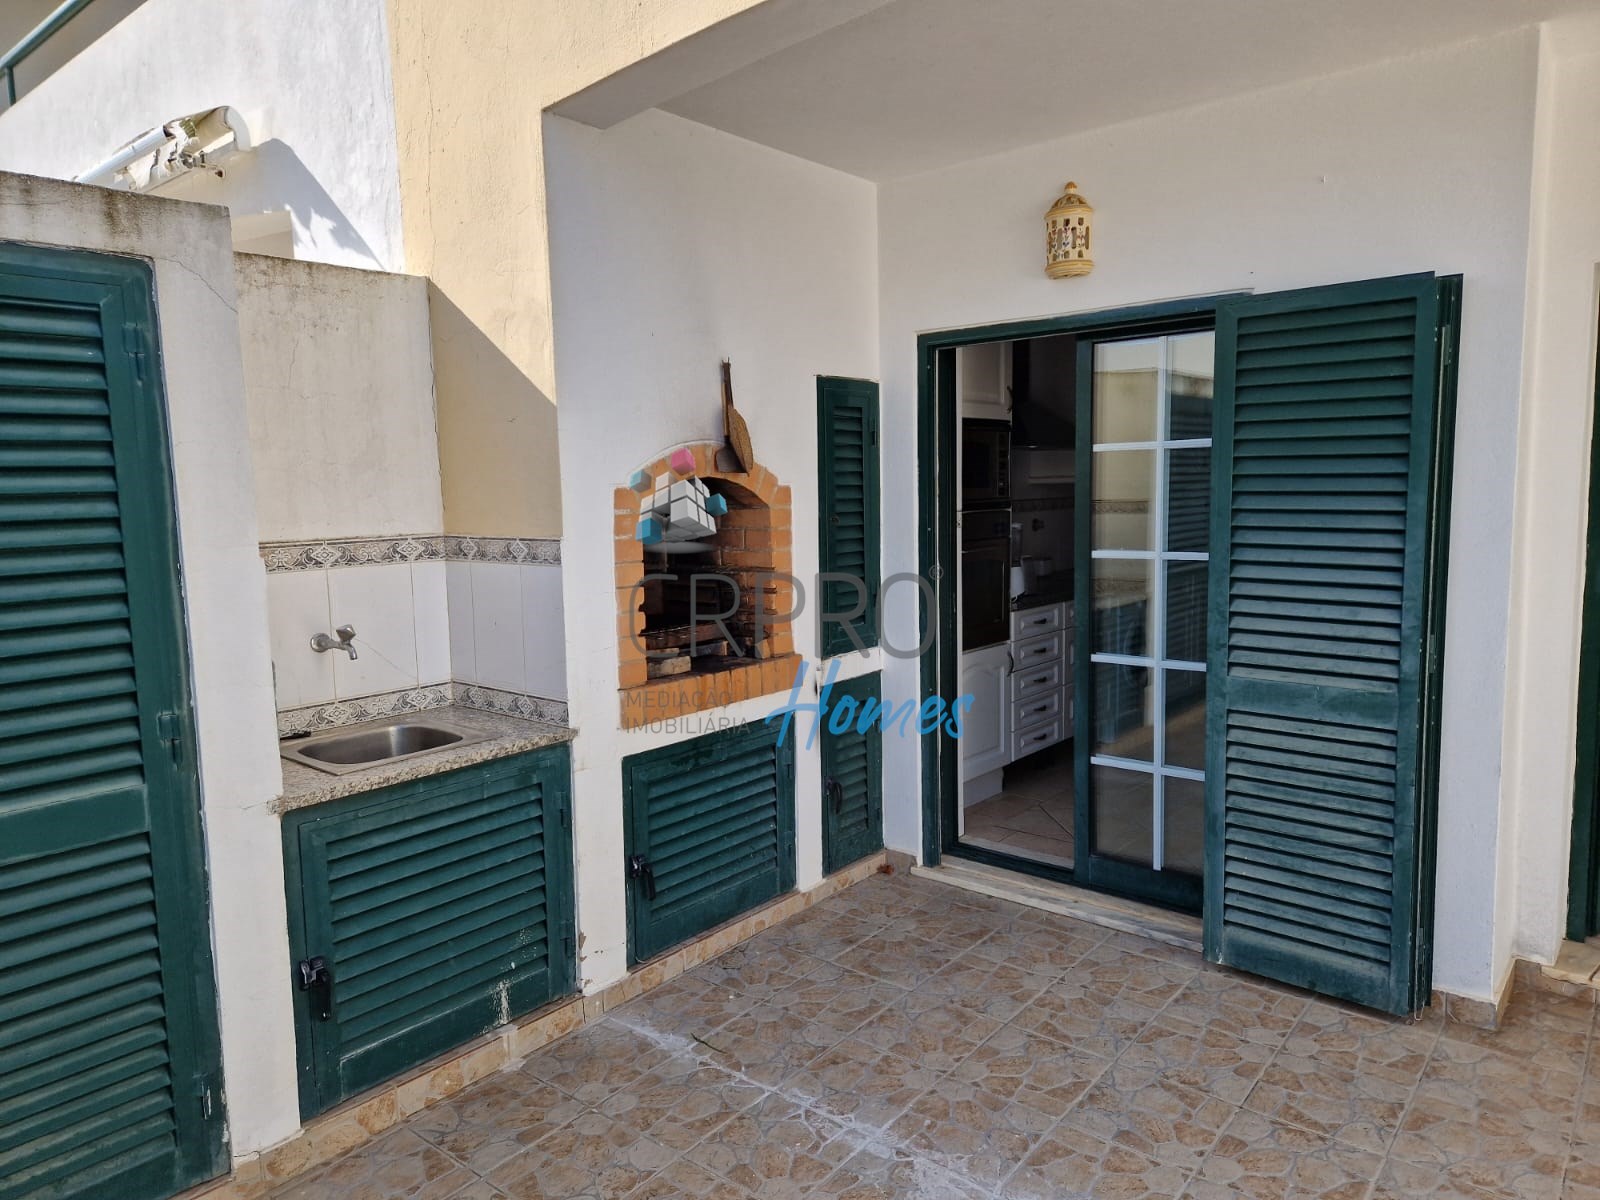 3 bedroom townhouse with private parking in Albufeira